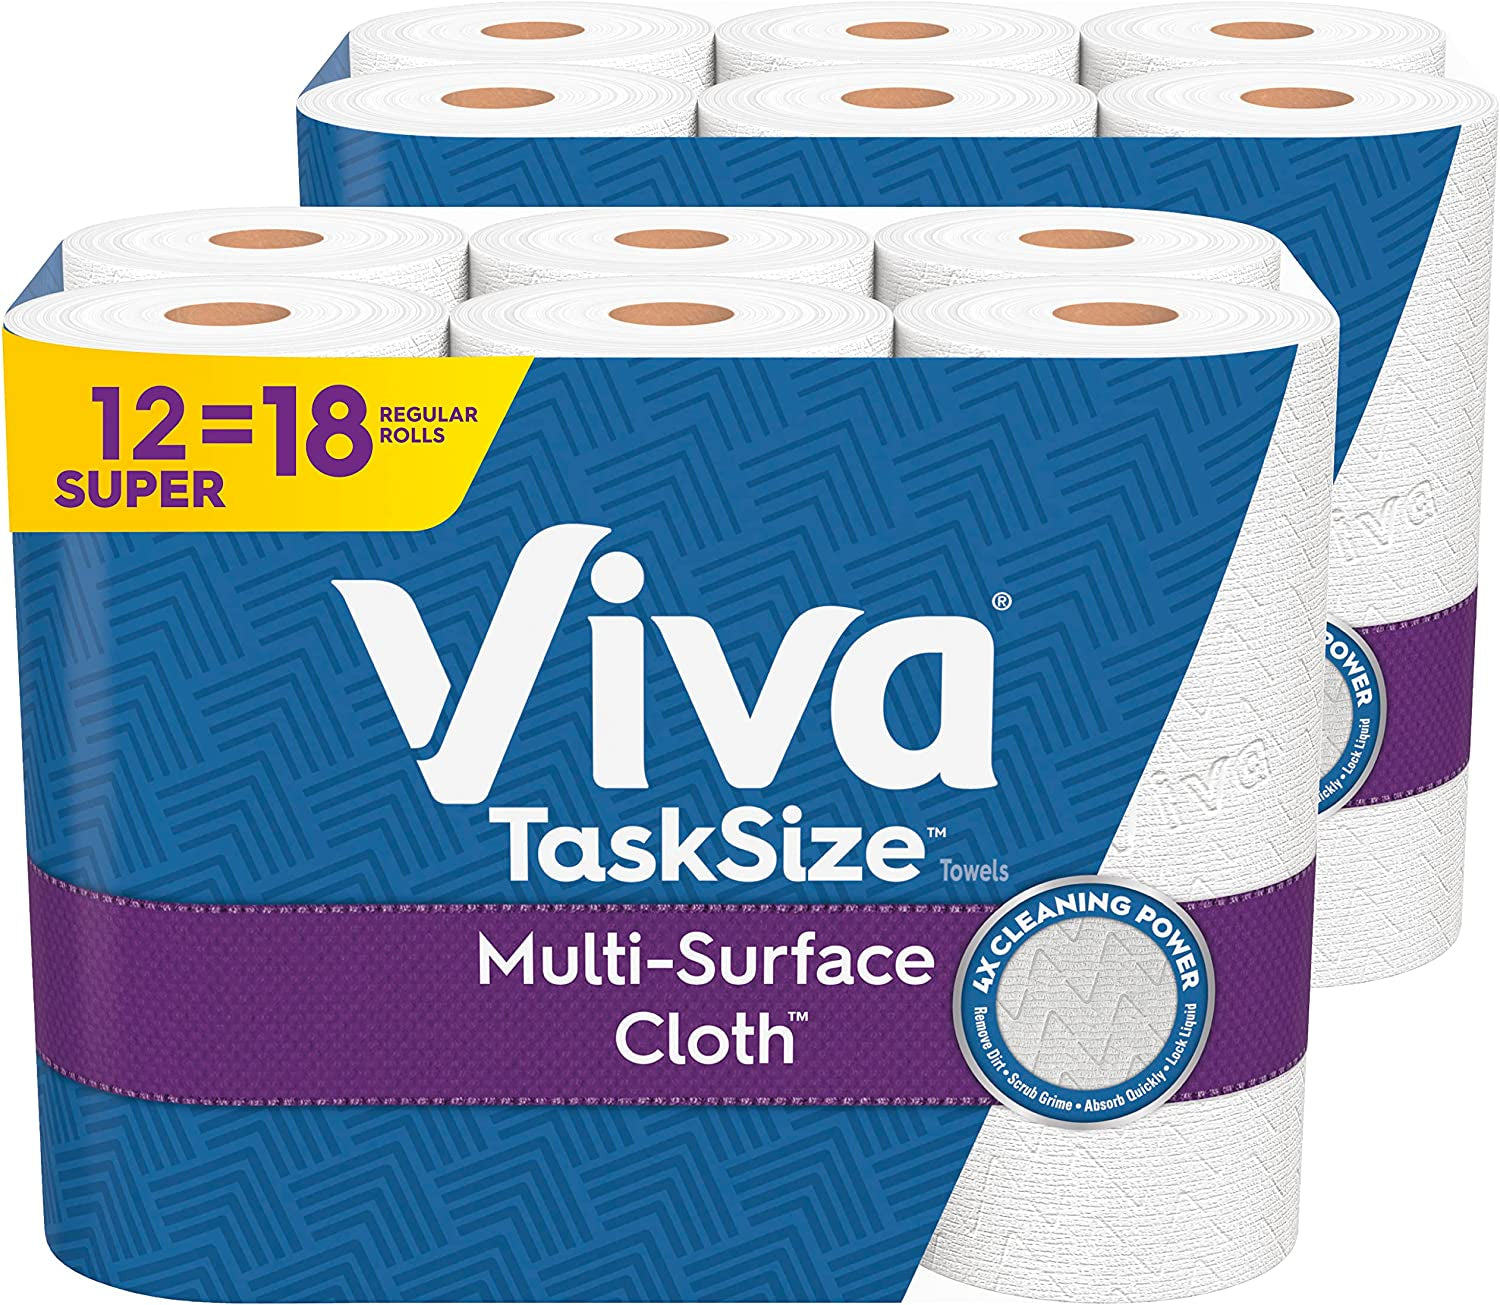 Multi-Surface Cloth Paper Towels, Task Size - 12 Super Rolls (2 Packs of 6) - 81 Sheets per Roll